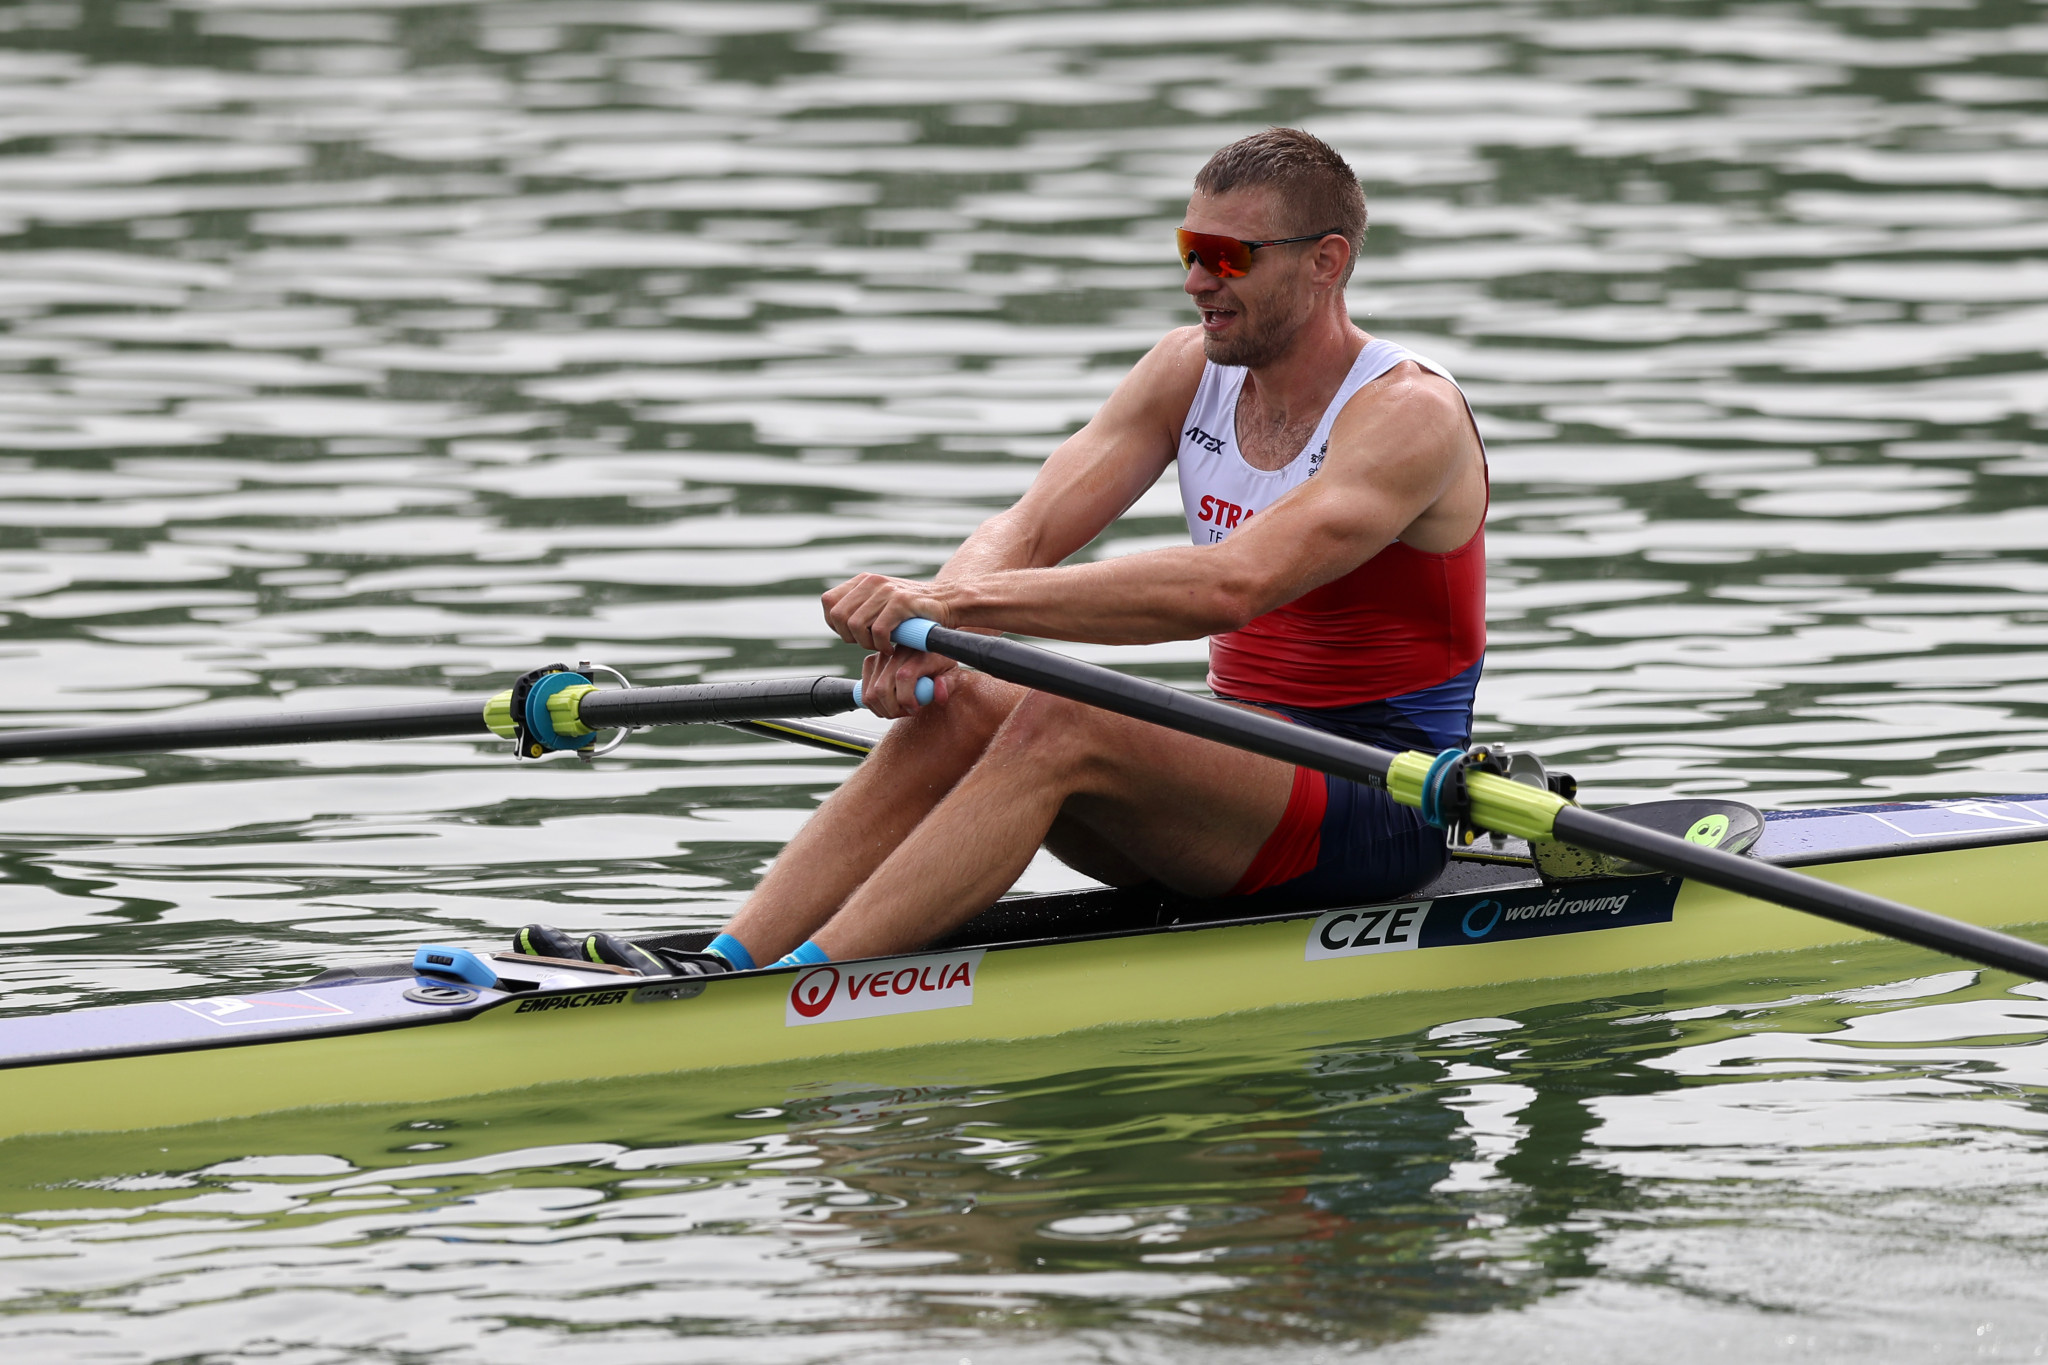 Račice to host first World Rowing Championships since 2019 in September as event gets green light